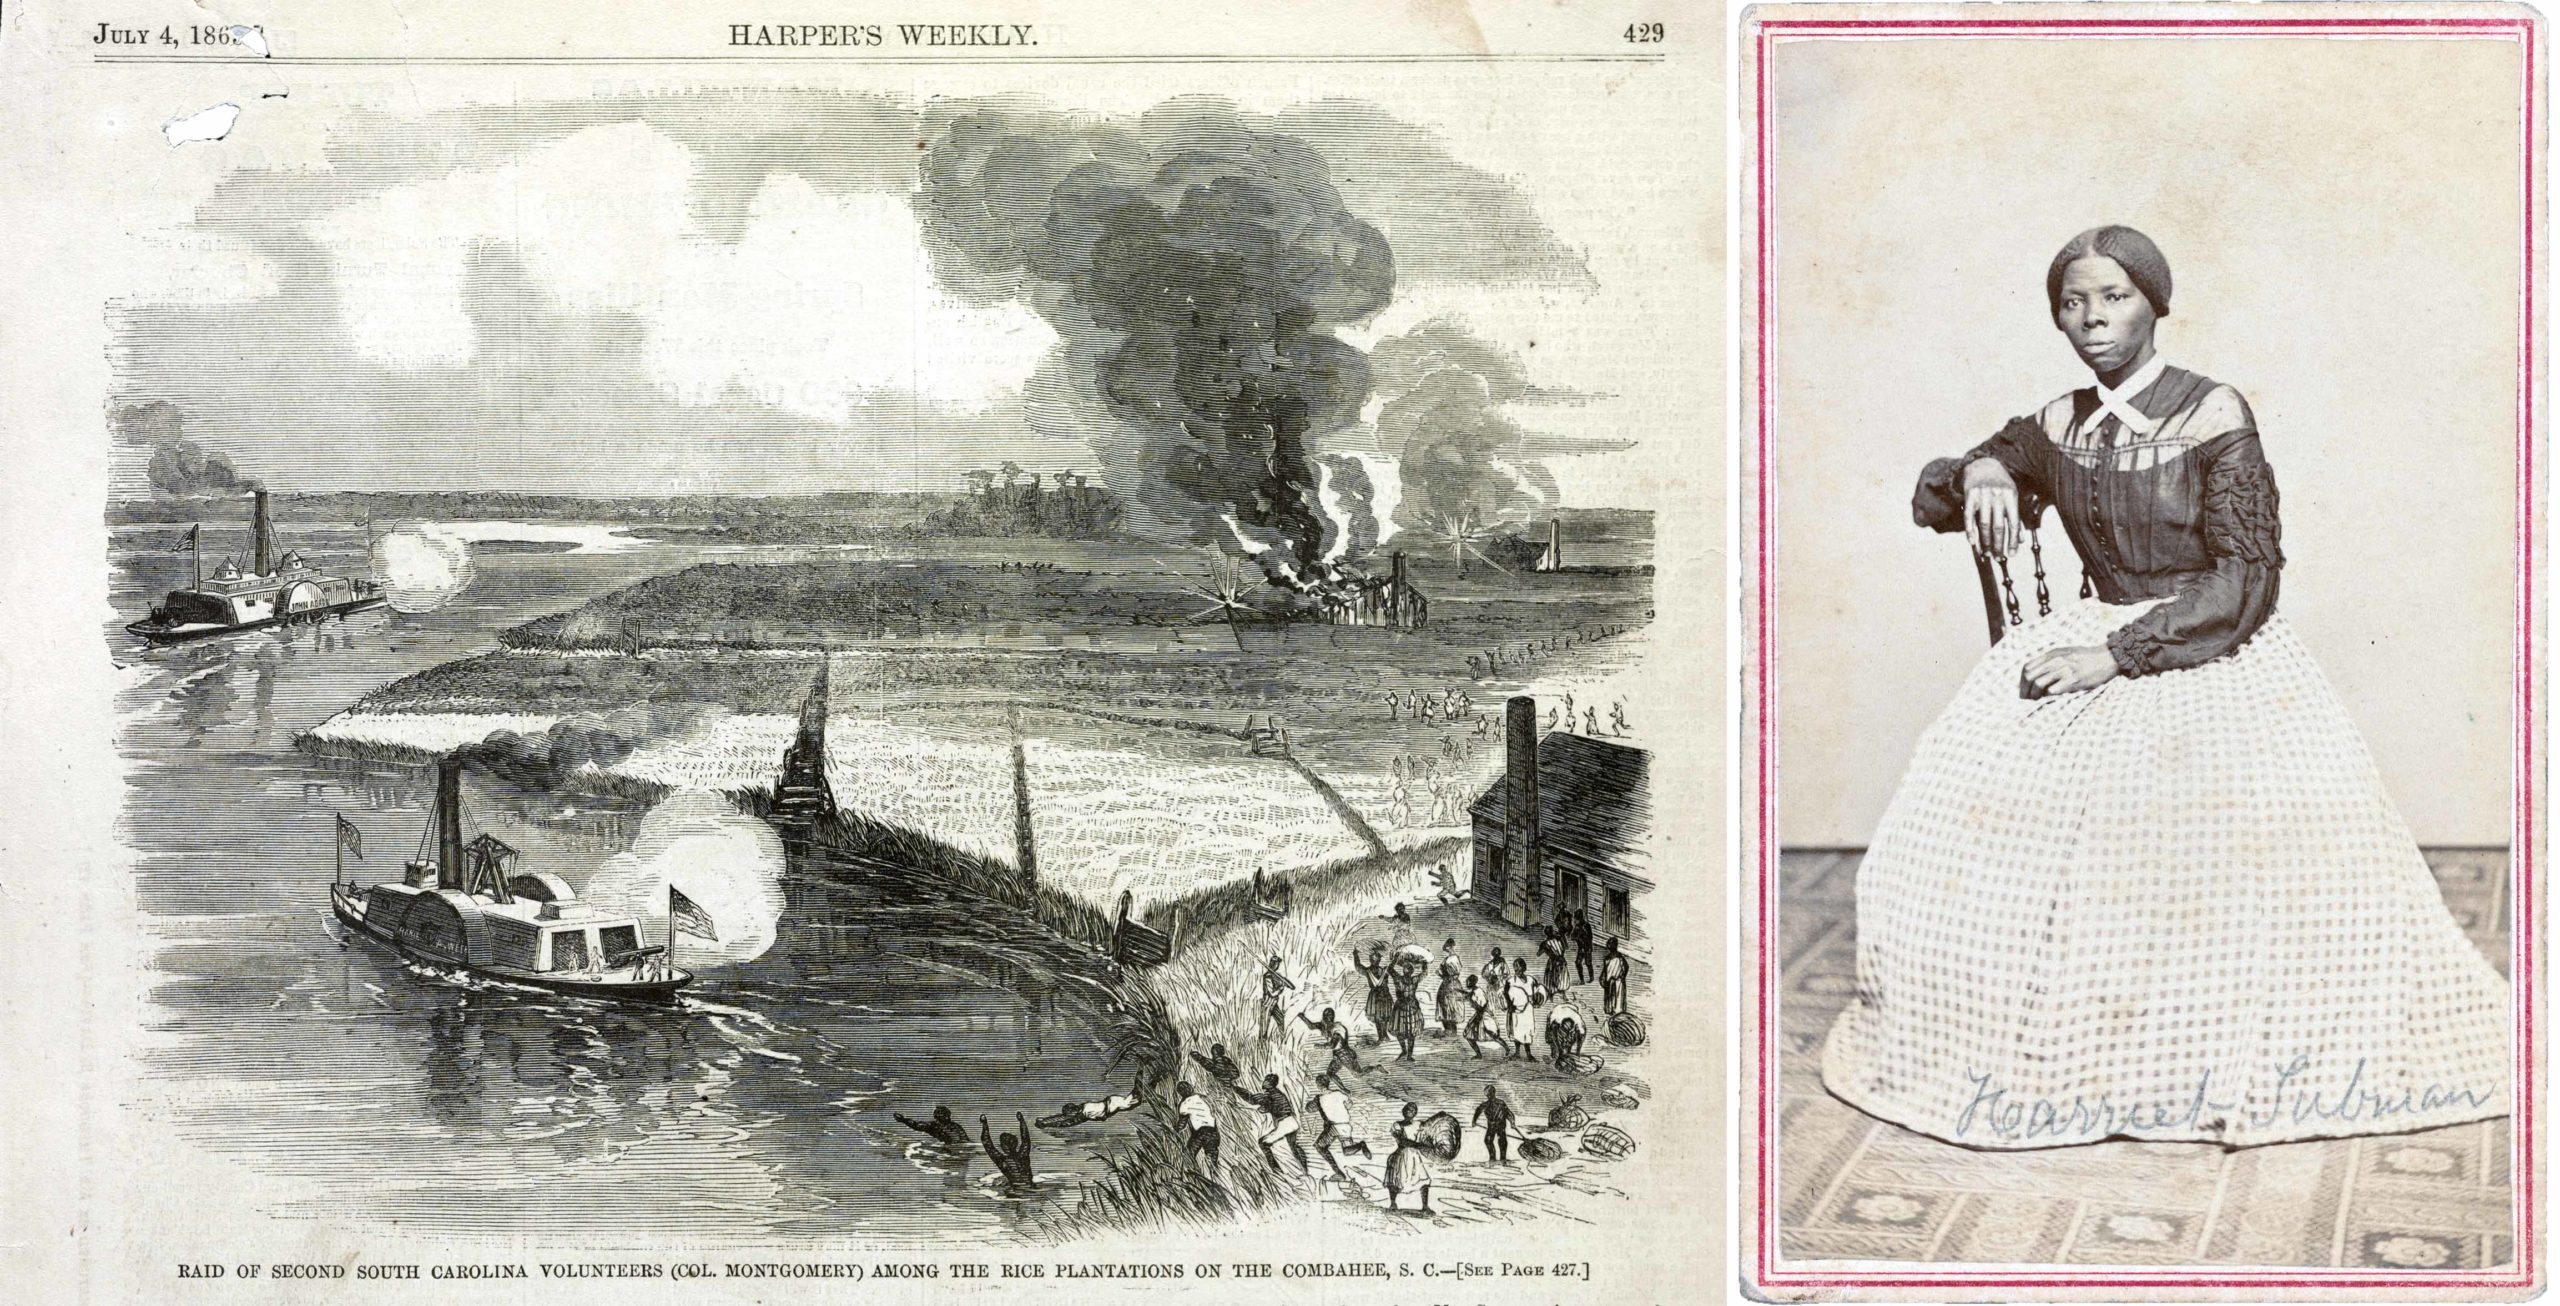 Left: “Raid Of Second South Carolina Volunteers (Col. Montgomery) Among The Rice Plantations On The Combahee, S.C.,” <em>Harper’s Weekly</em>, July 4, 1863, p. 429, wood engraving, 27.6 x 39.5 cm (Library of Congress); right: Benjamin F. Powelson, <em>Portrait of Harriet Tubman</em>, c. 1868–69, albumen carte-de-visite, 10 x 6 cm (Library of Congress) <br><br>Harriet Tubman, who had emancipated herself in 1849, became the first woman to lead a major military operation in the United States when she led 150 members of the U.S. 2nd South Carolina Volunteers—a Black regiment—in a raid on Combahee Ferry in South Carolina. Tubman and the soldiers rescued at least 700 enslaved Black people on the night of June 1, 1863.